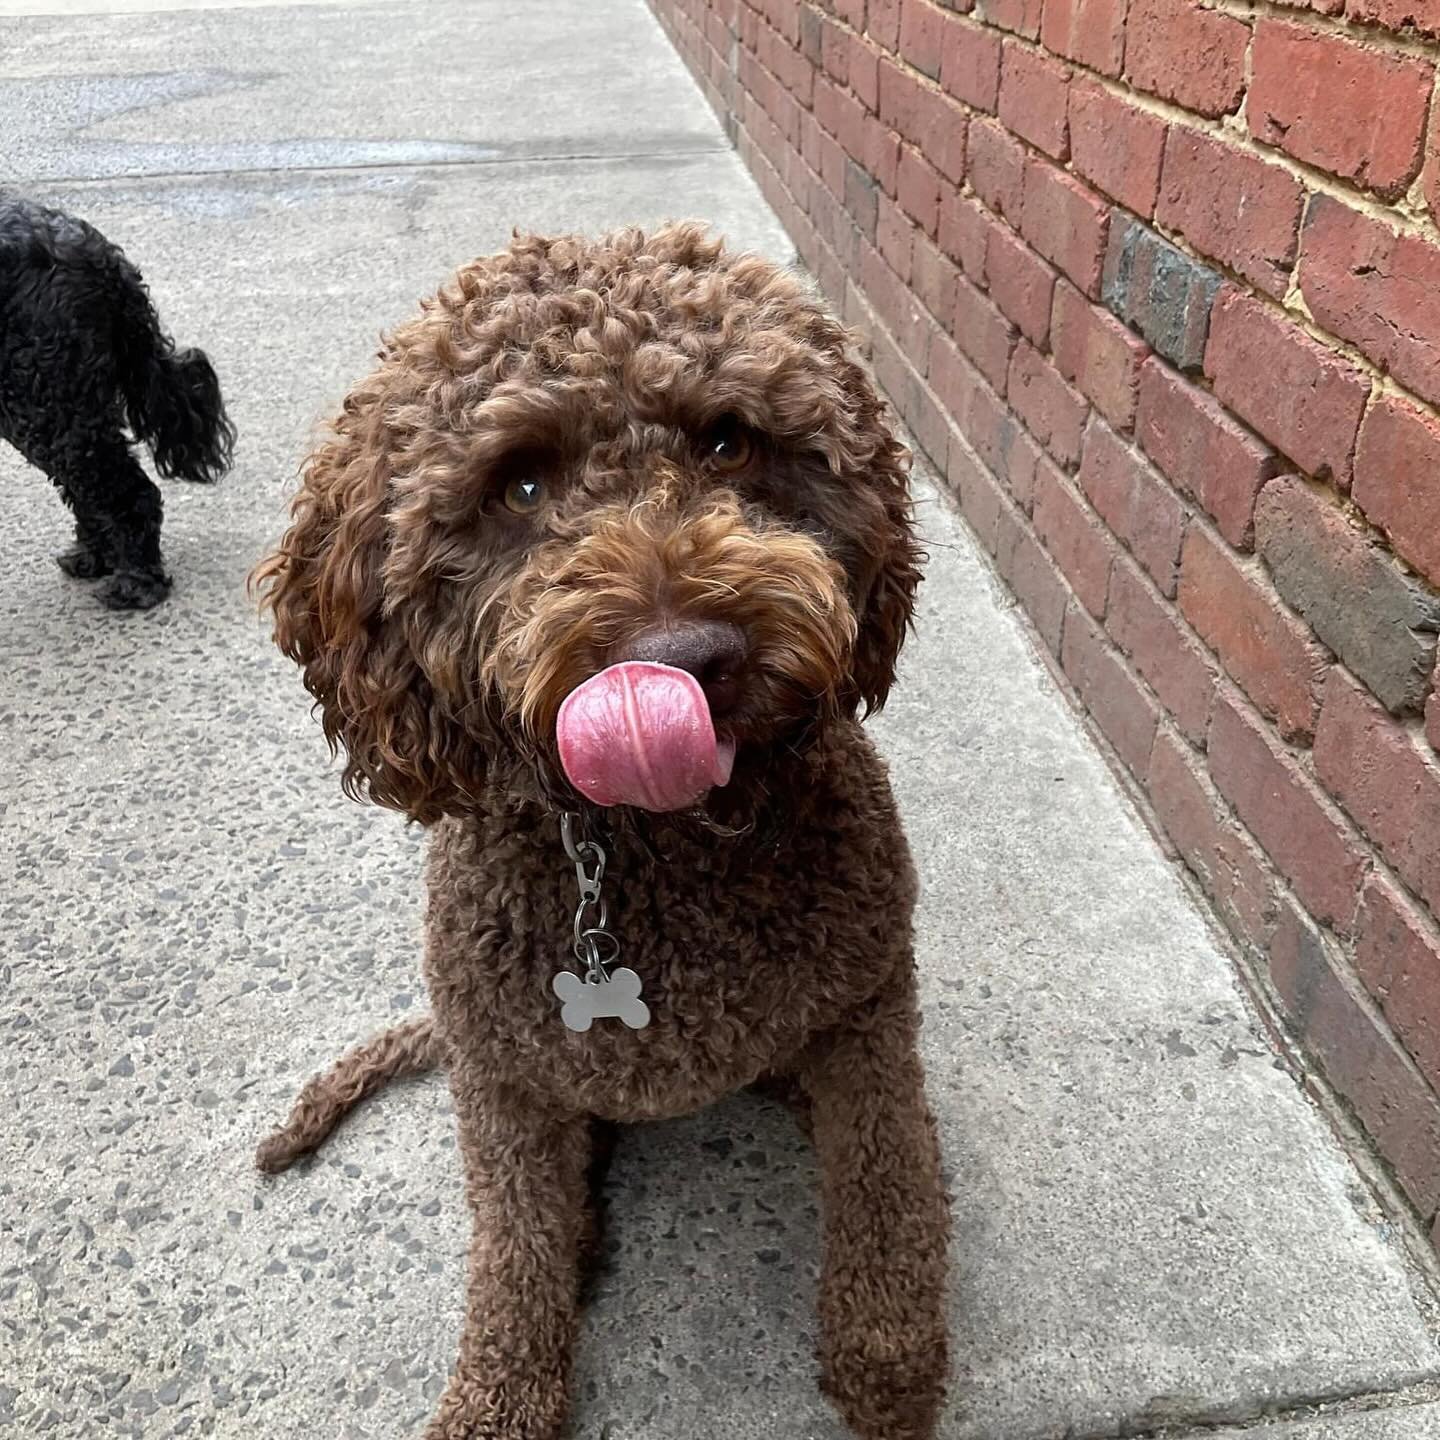 Tongues Out Tuesday with Dahlia! 
.
.
#tot #tonguesouttuesday #fundogs #dogs #dogsplay #dogsplaying #daycare #tuesdayvibes #doggydatcare #lagotto